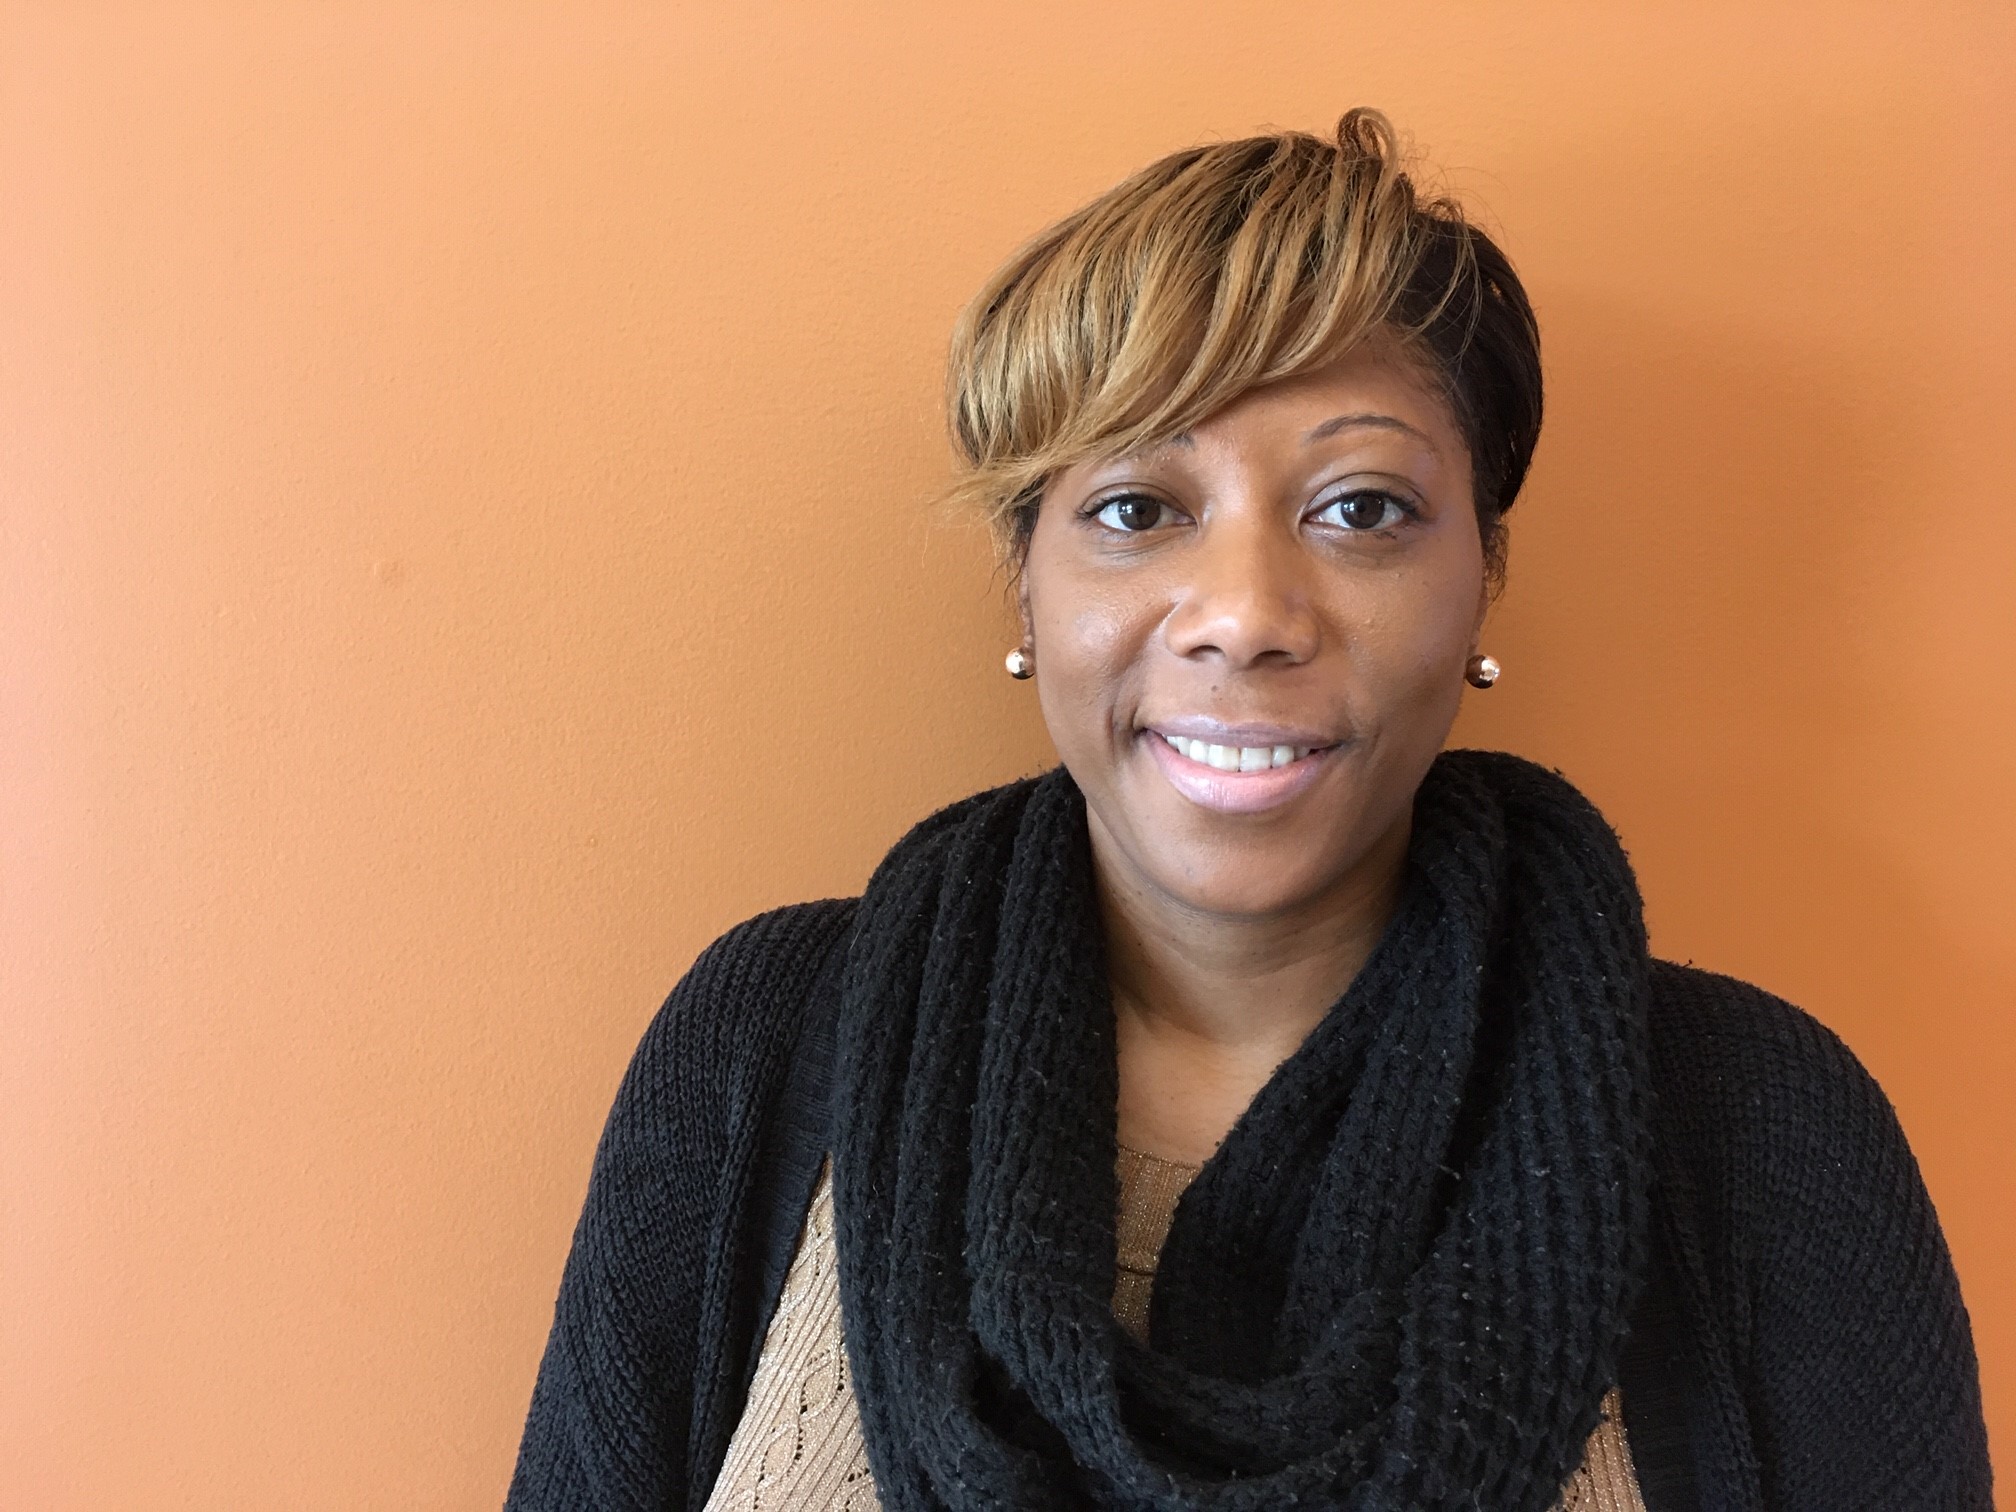 Tomeka Wilcher is the educational program developer at the Center for Faculty Development.